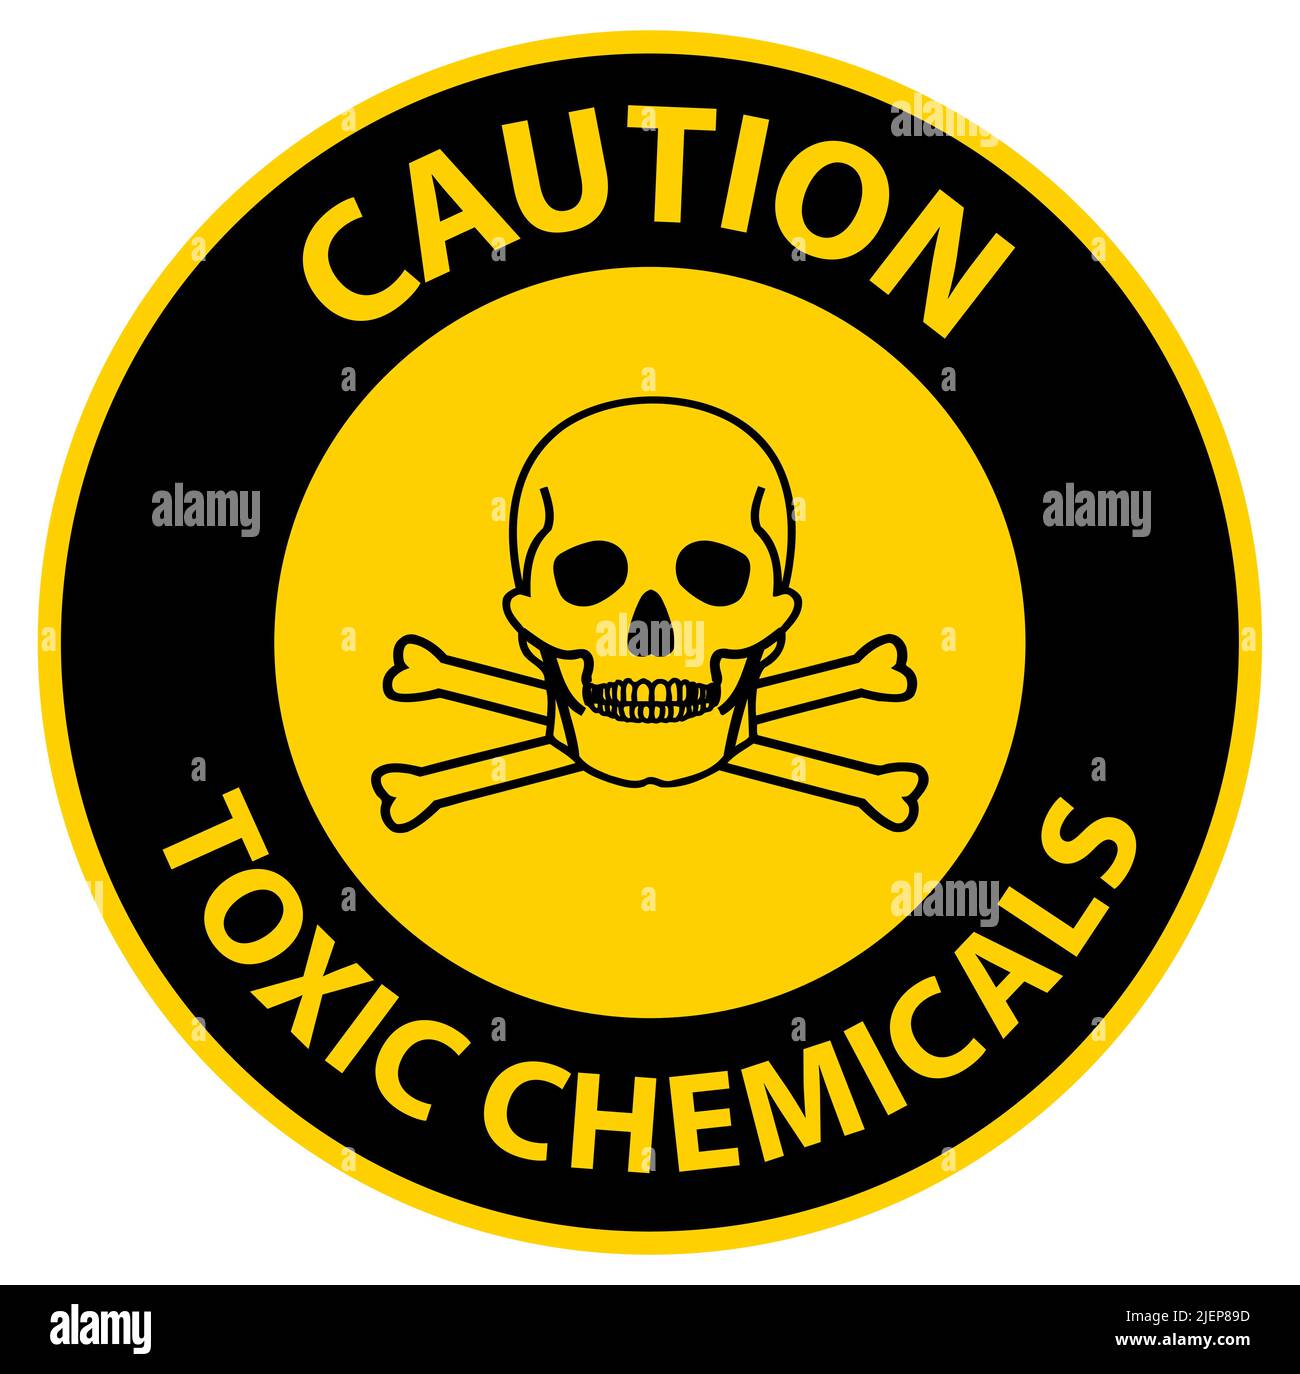 Caution Toxic Chemicals Symbol Sign On White Background Stock Vector